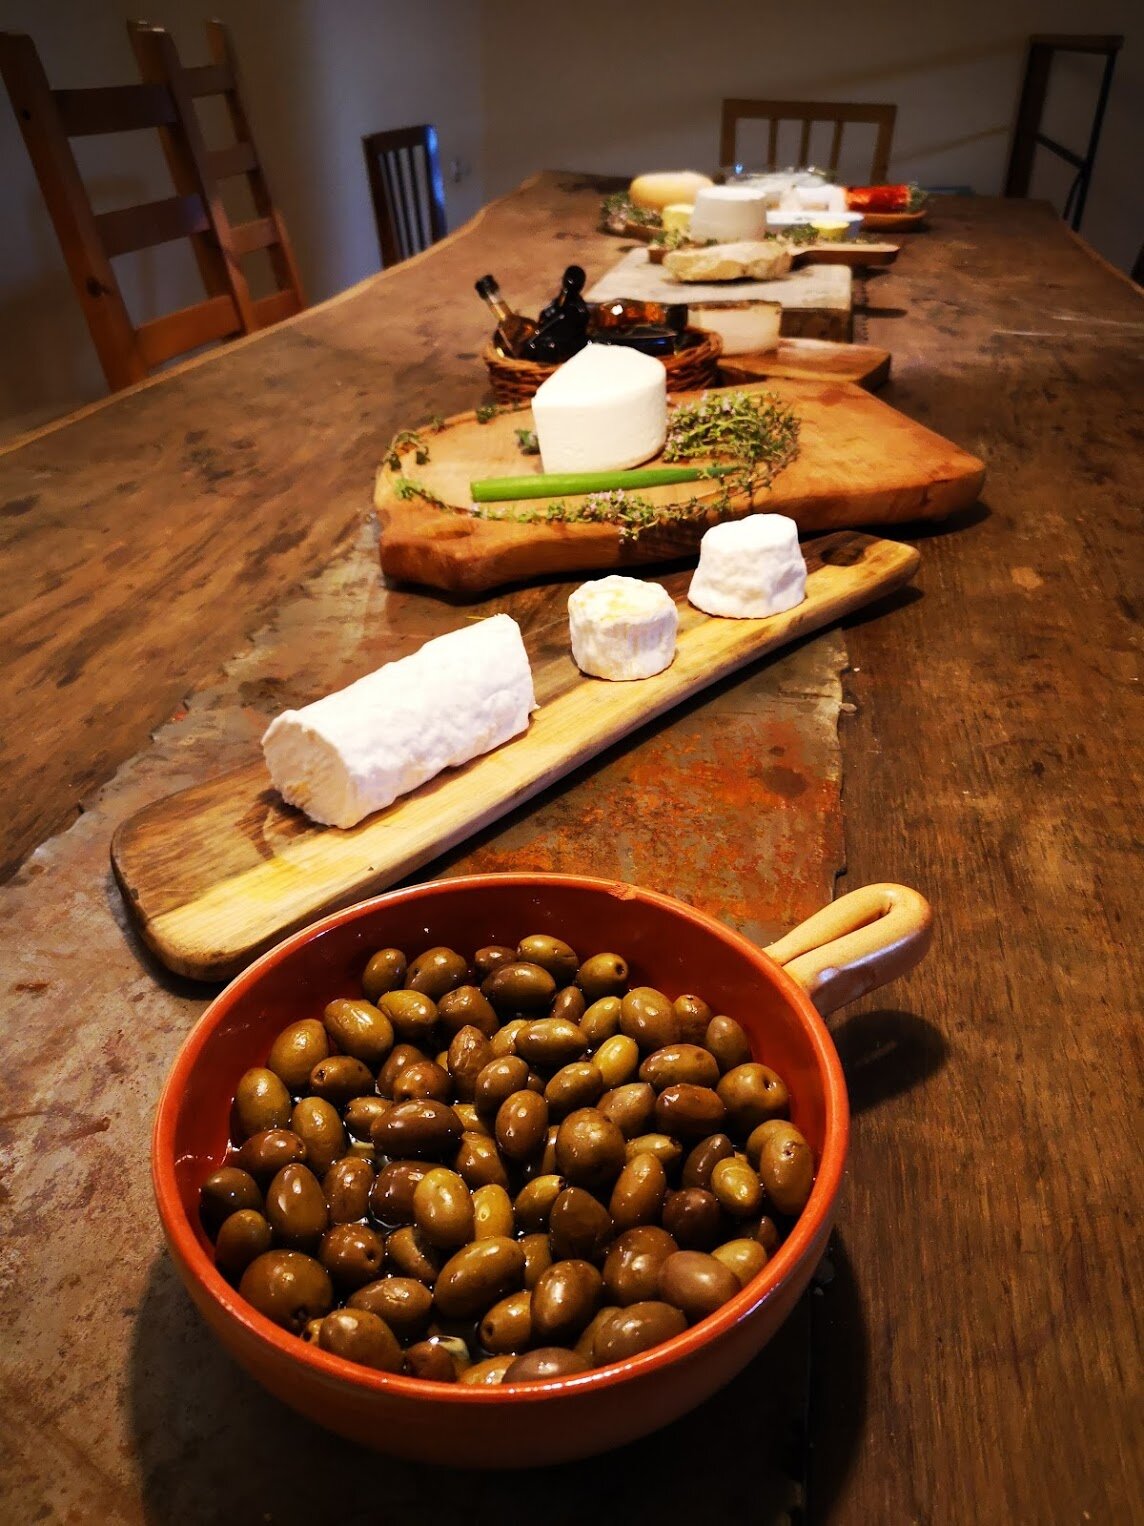 andrewvillone_Kumparicka olives and cheese_Local Flavors.jpg